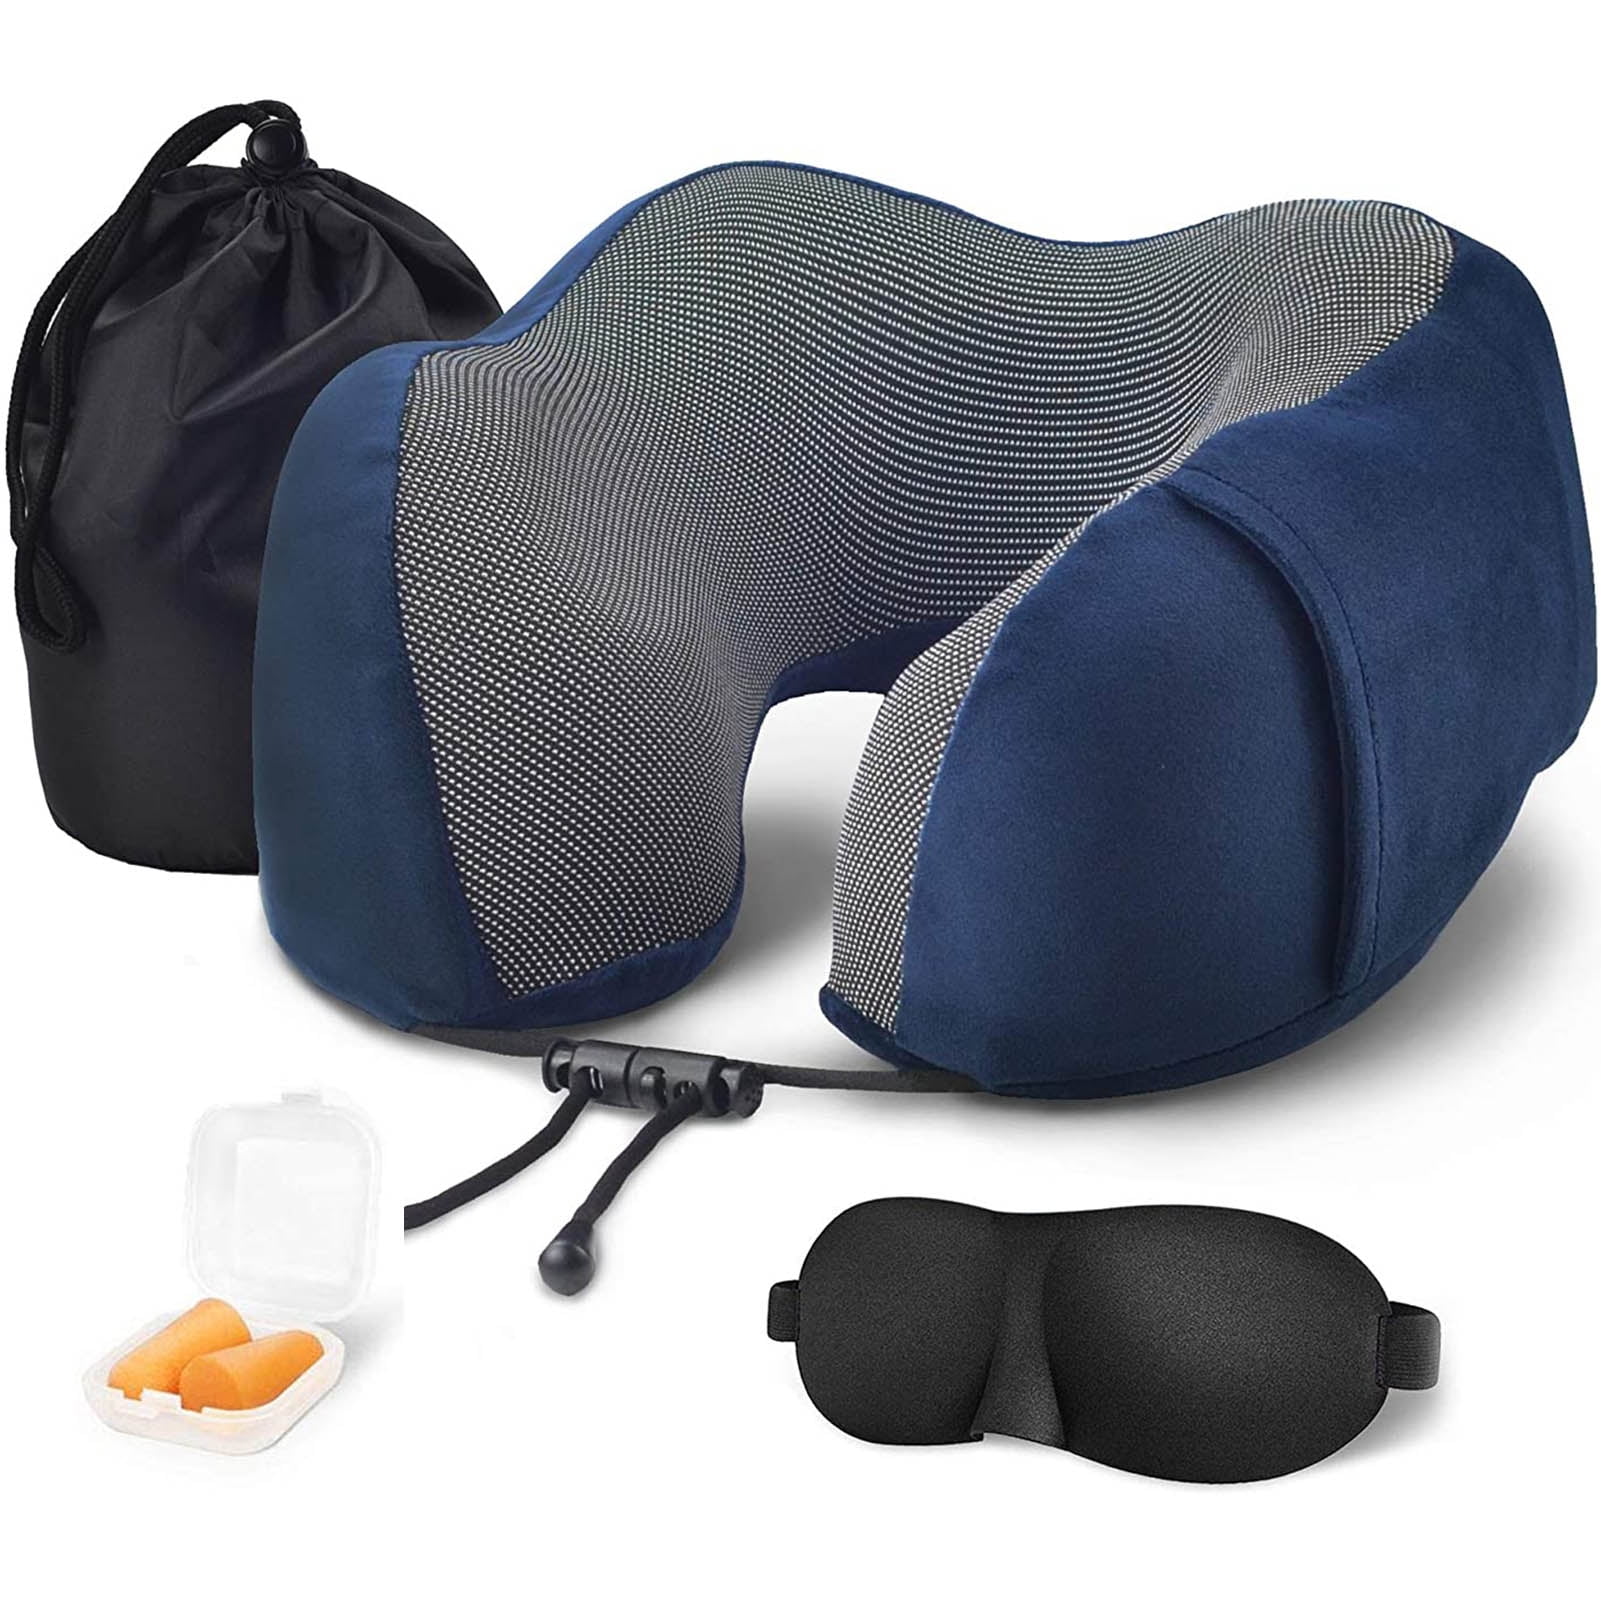 Eye Mask and Ear Plugs Comfortable Portable Neck Head Support Cushion for Airplane Train Car Travelling Reading Sleeping FYLINA Travel Pillow Memory Foam Neck Pillow with Carry Case 